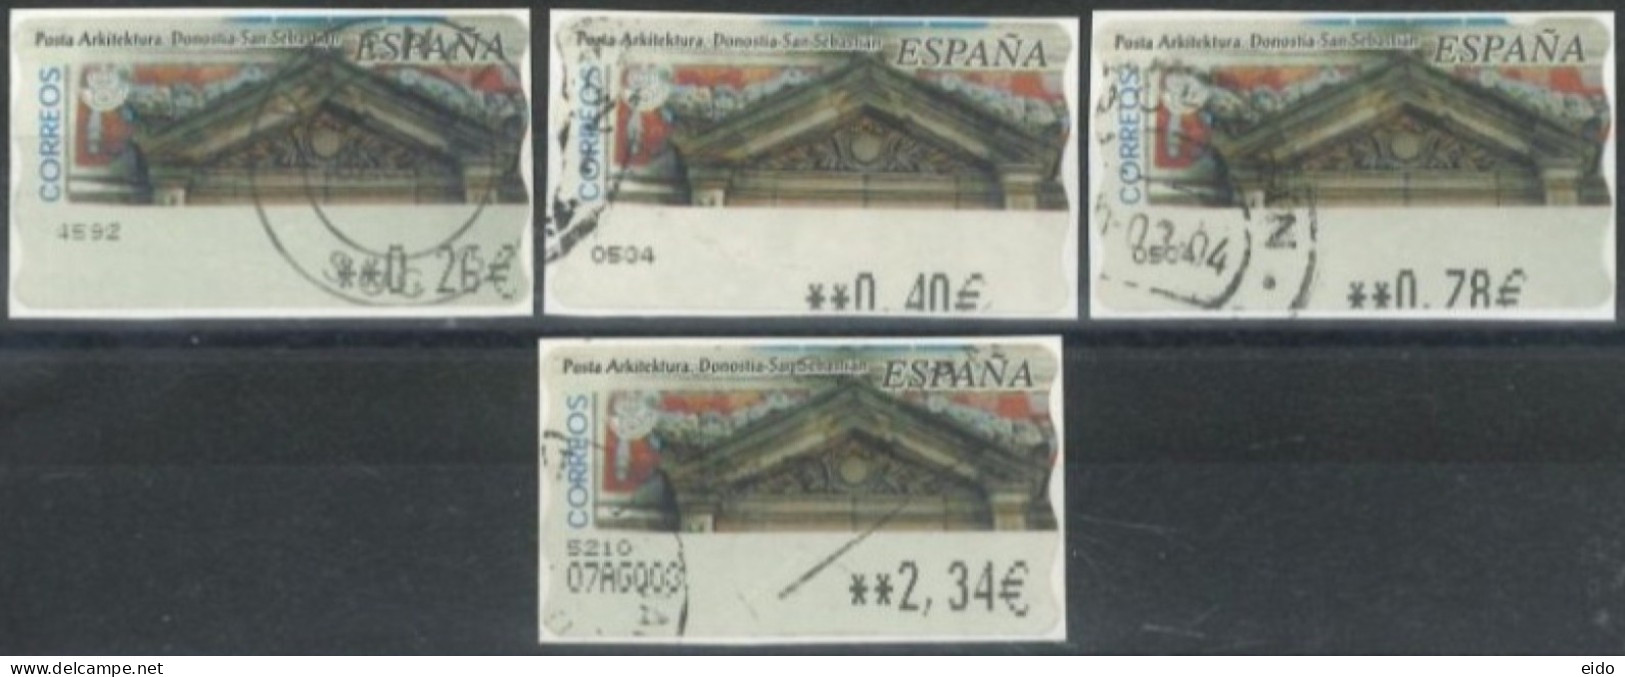 SPAIN- 2004, SAN SABASTIAN ARCHITECTURE STAMPS LABELS SET OF 4, DIFFERENT VALUES, USED. - Used Stamps